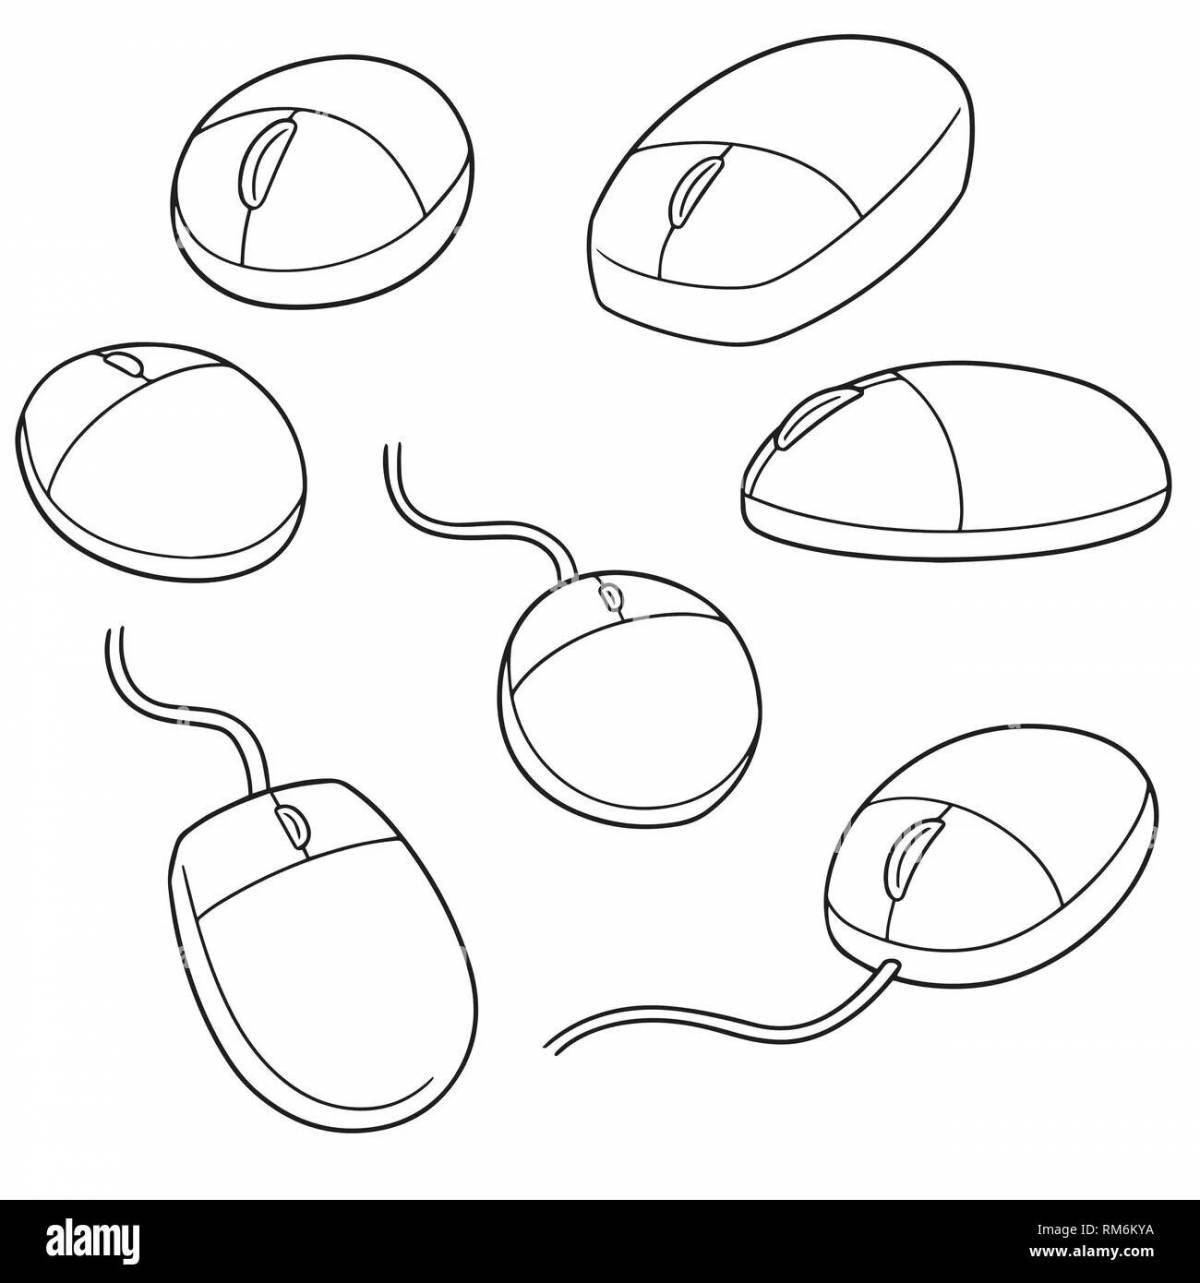 Color-frenzy glasses mouse coloring page